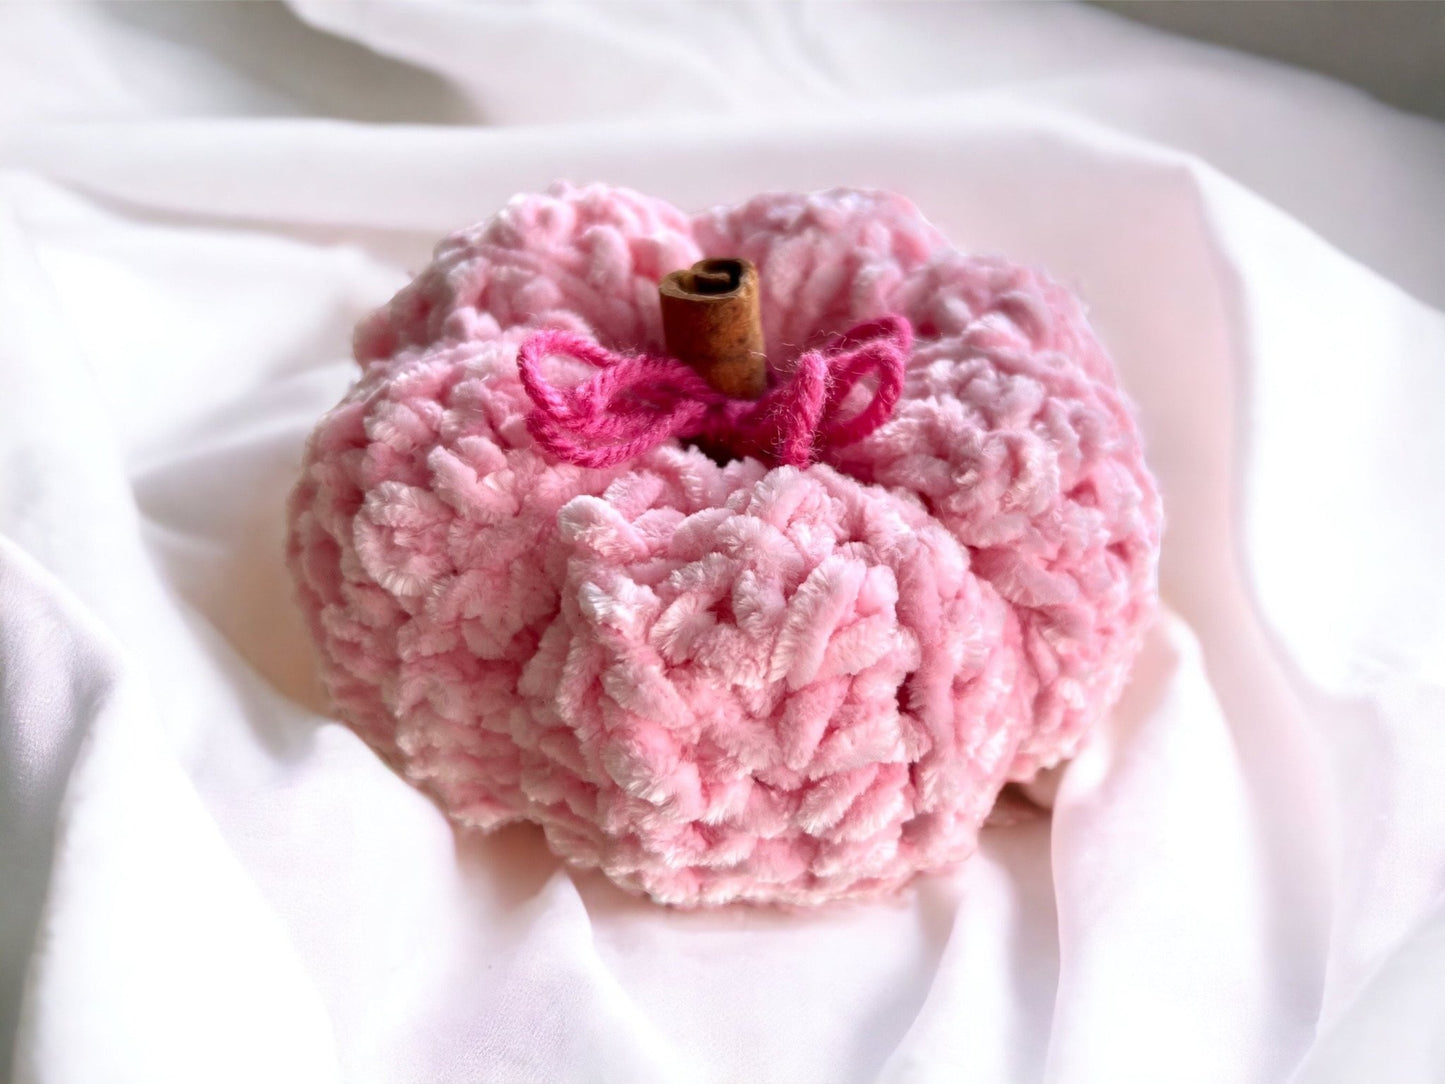 Plush Pink pumpkin decorative with cinnamon stick stem for touch of warmth - Lilly Grace Sparkle Boutique